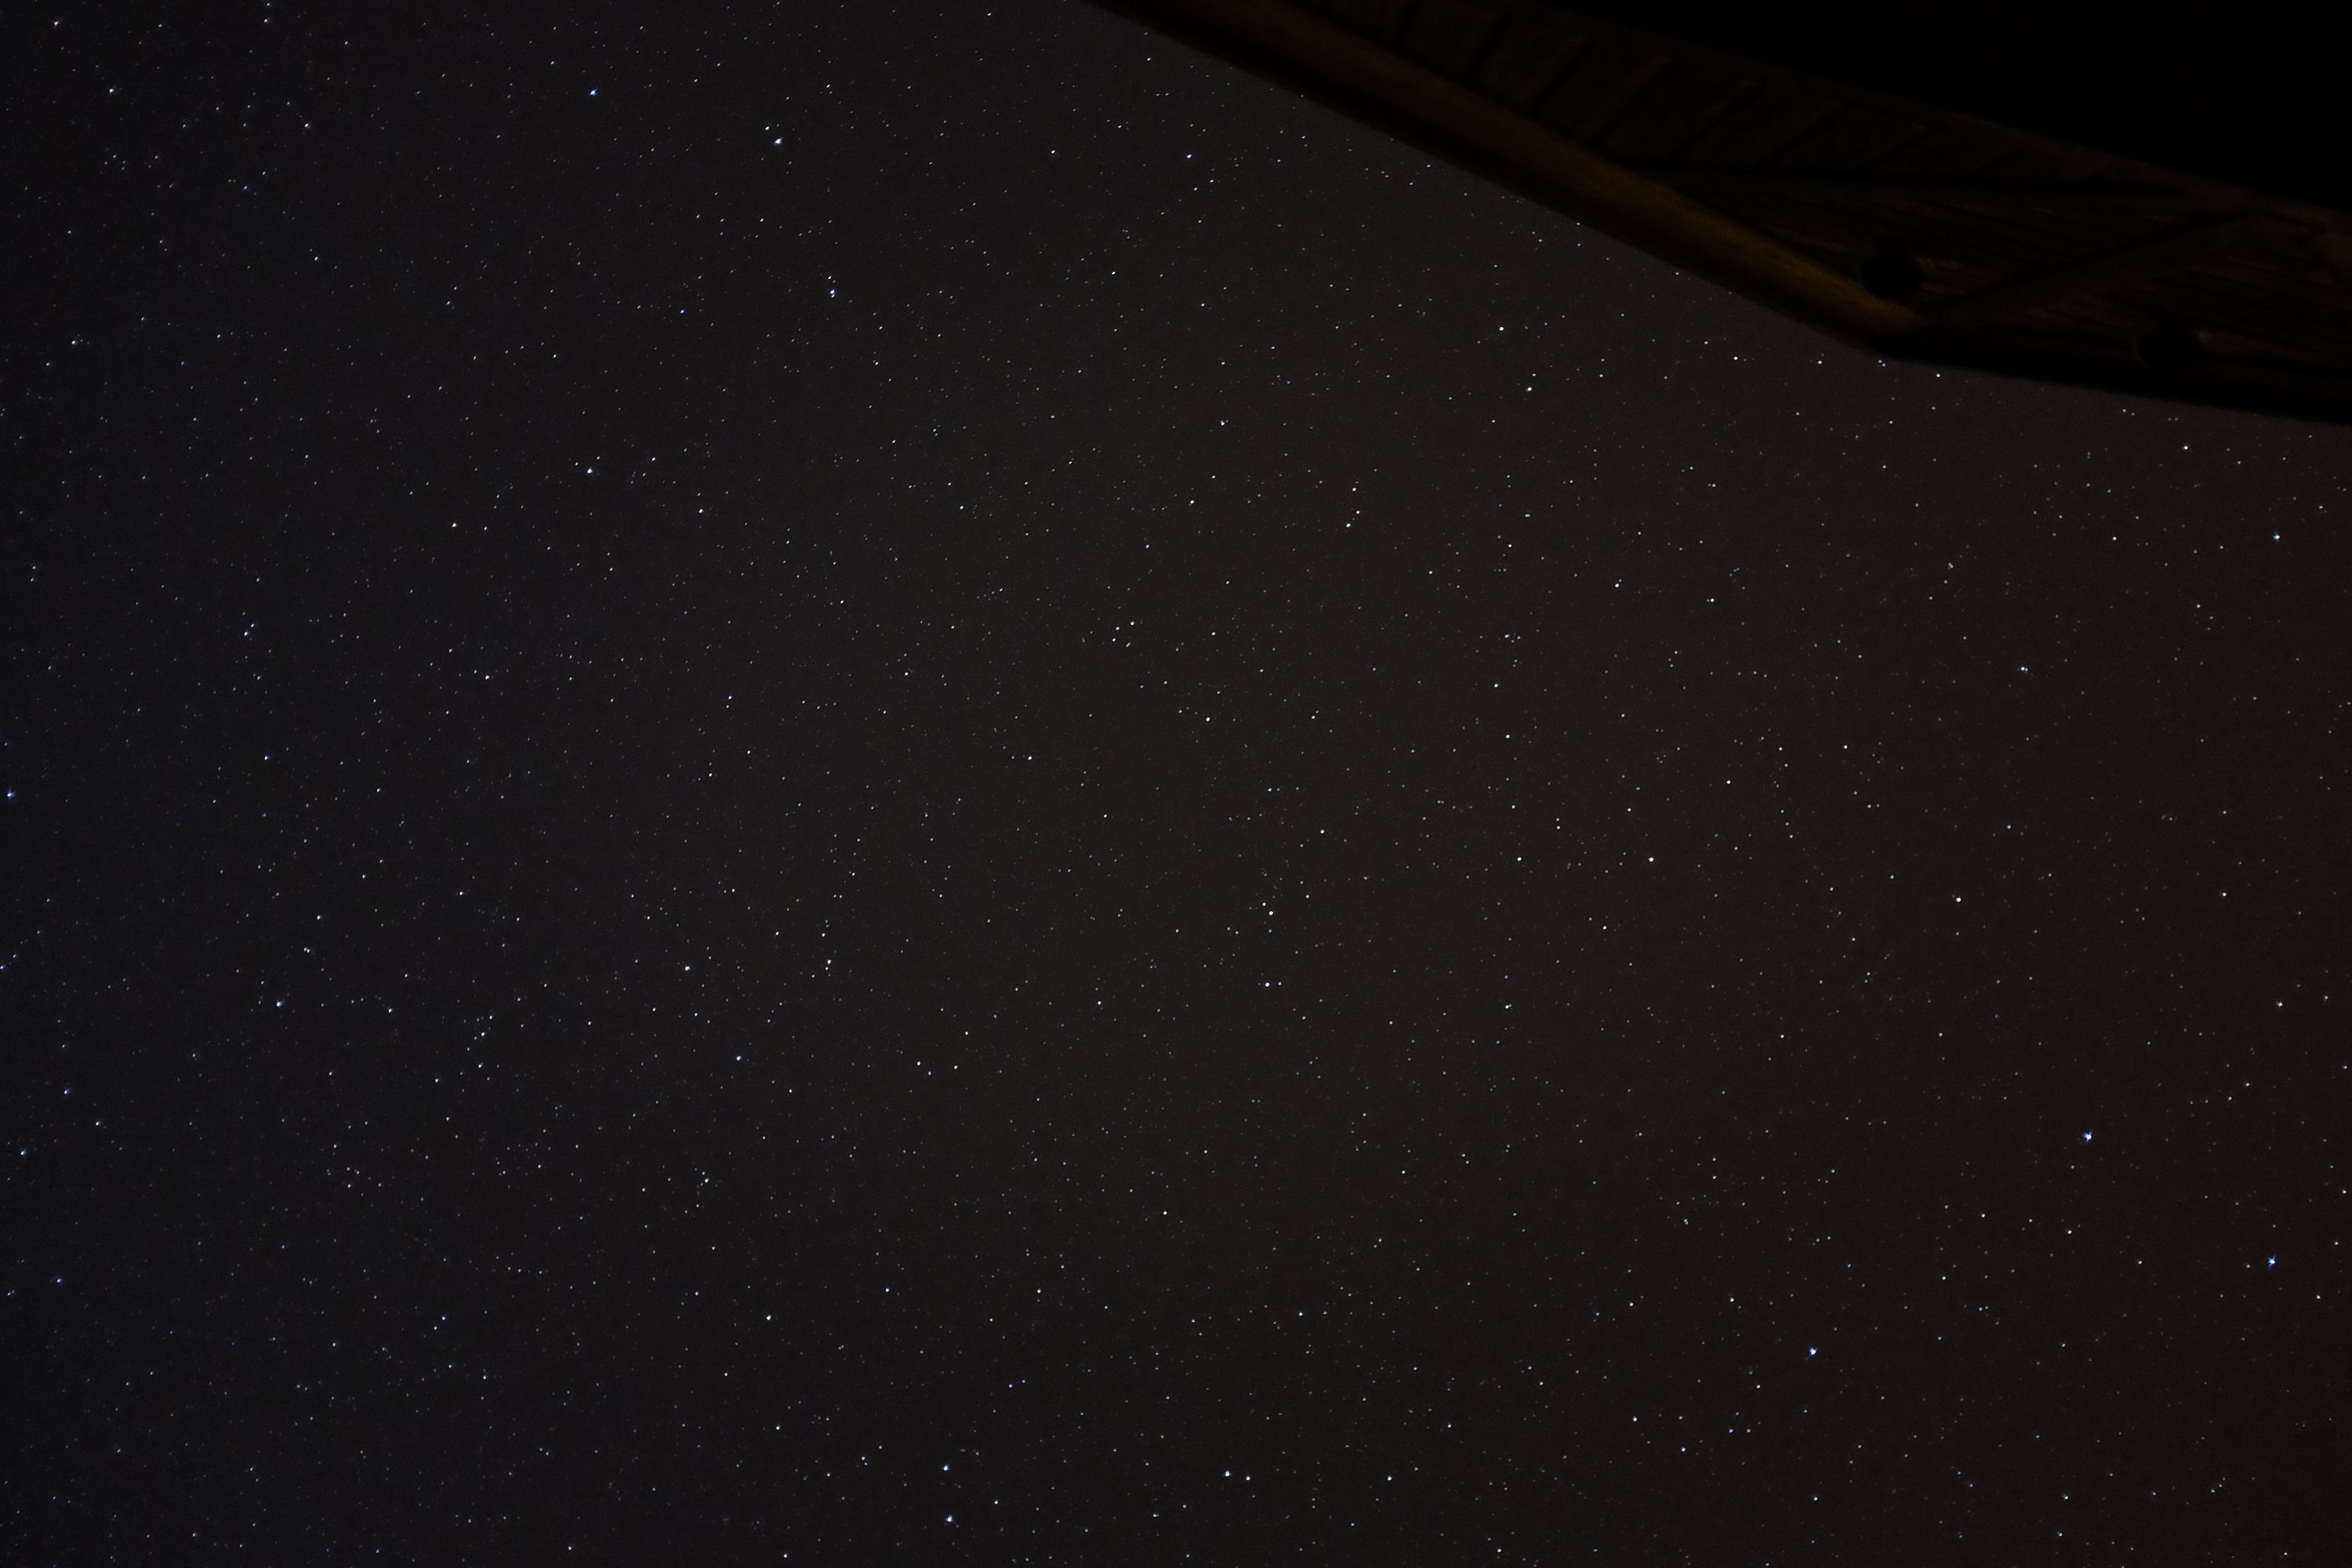 Looking up at the night sky, full of stars, from what appears to be the porch of a house.